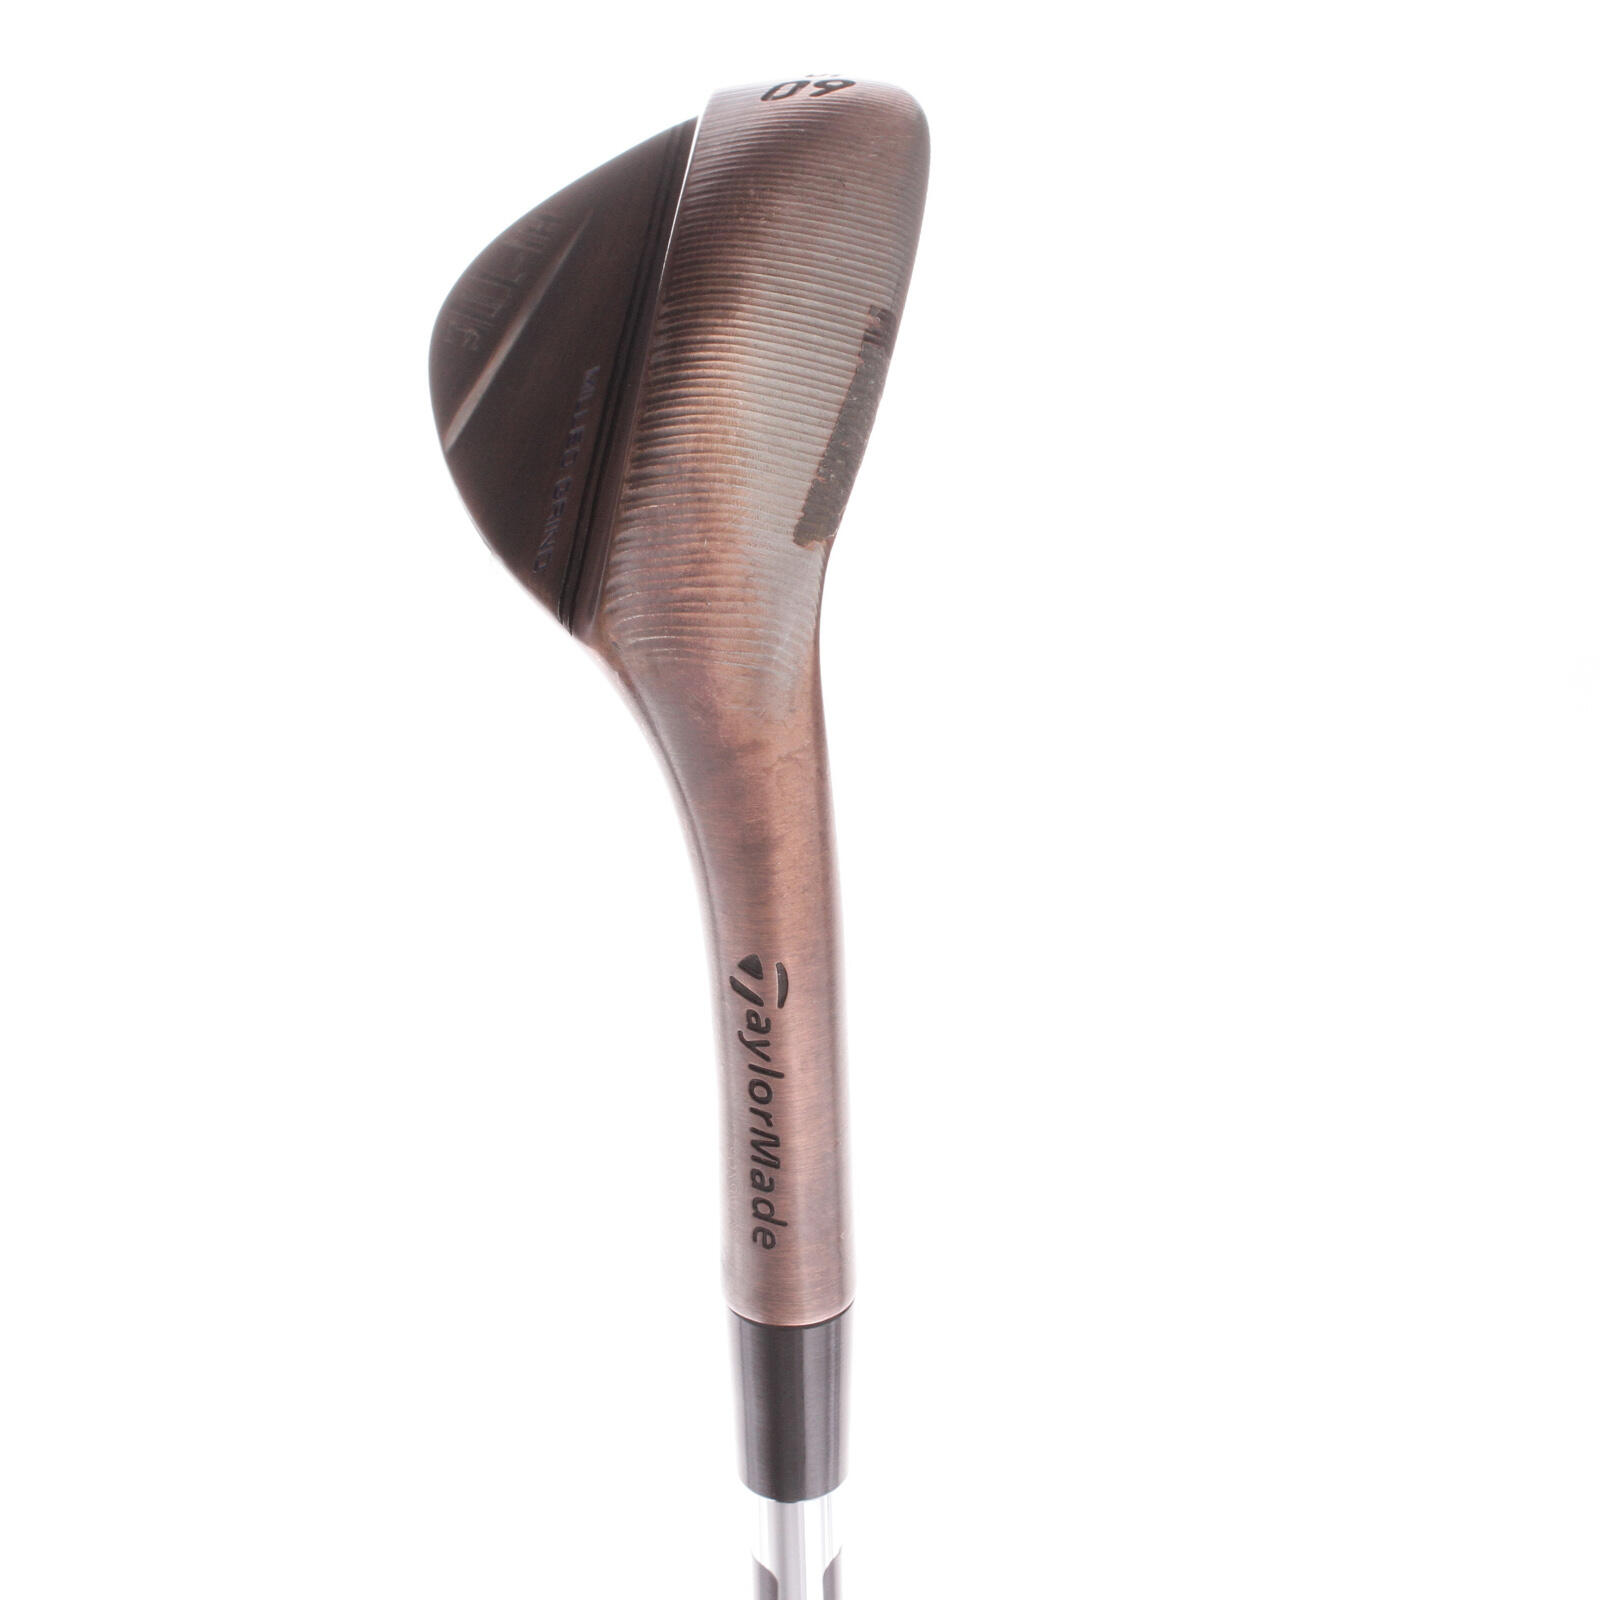 USED - Lob Wedge TaylorMade Milled Grind Hi Toe 60 Degree Right Hand  - GRADE B 3/6